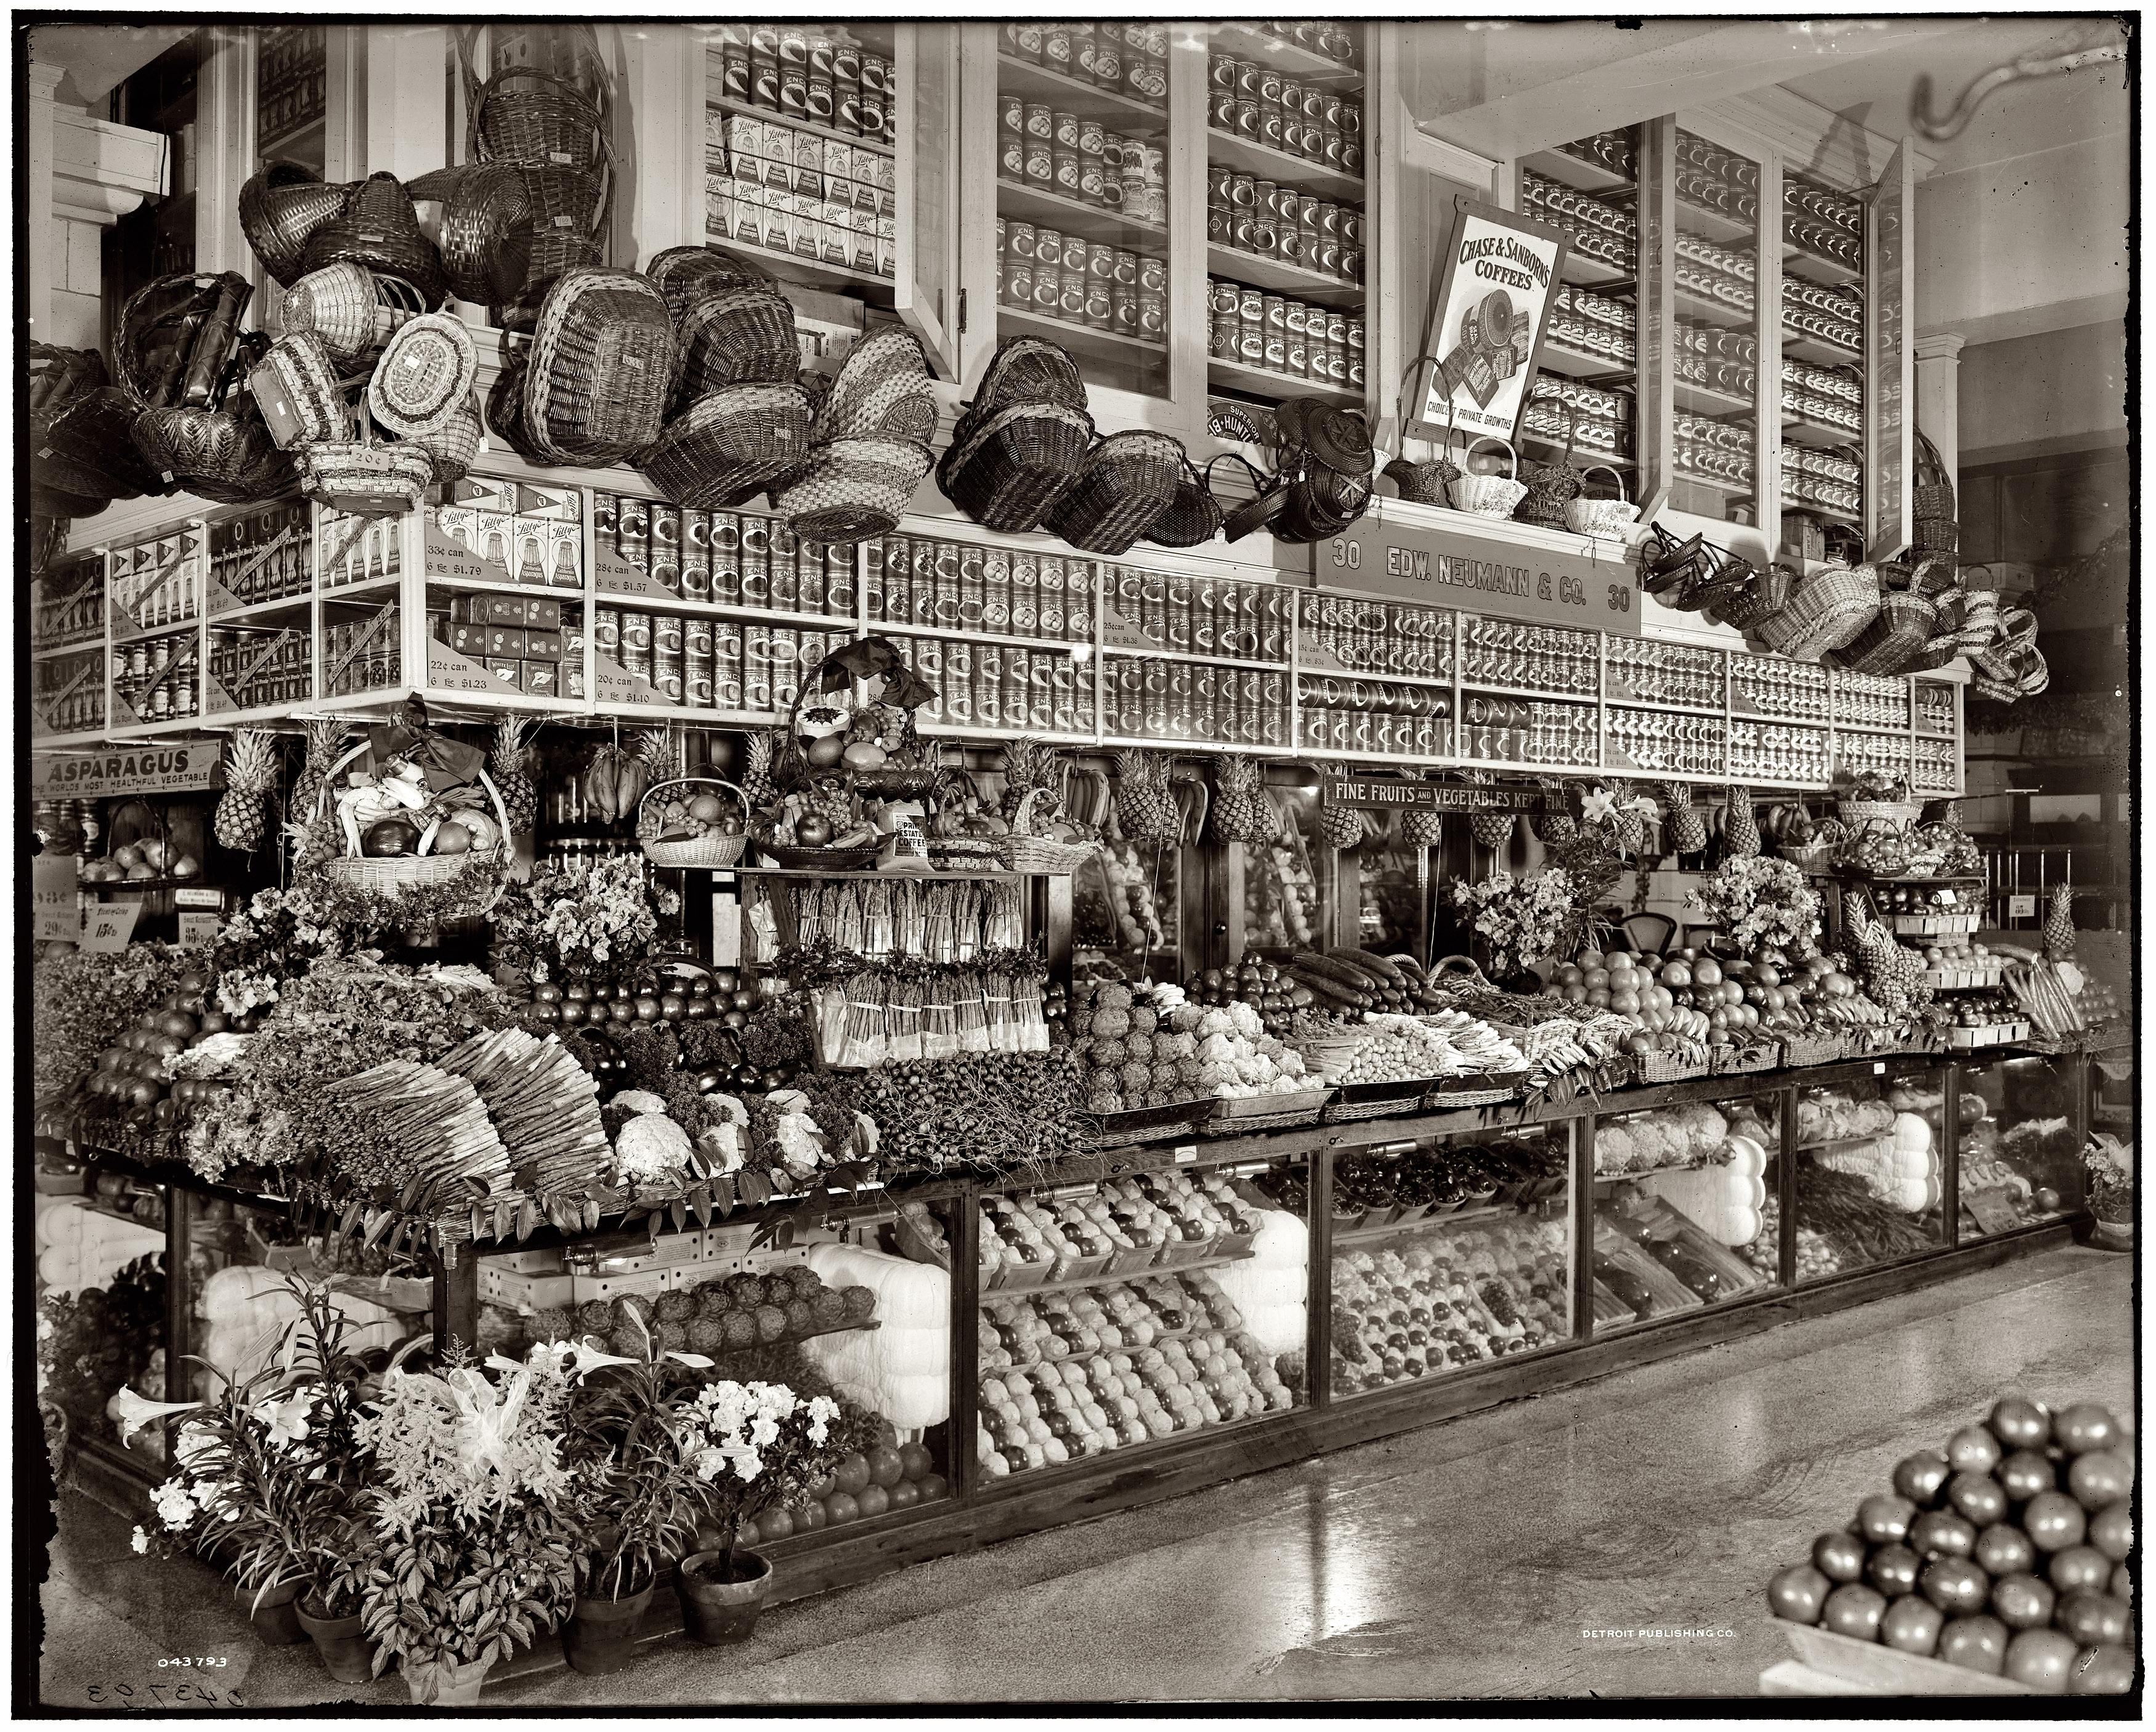 The Edw. Neumann grocery at Broadway Market in Detroit circa 1910. 8x10 glass plate negative, Detroit Publishing. View superjumbo full size. (Which is still less than half the pixel dimensions of the full-resolution, 6100 x 5000 image -- i.e., less than a quarter of the available detail!) Who'll be the first to count all the cans?